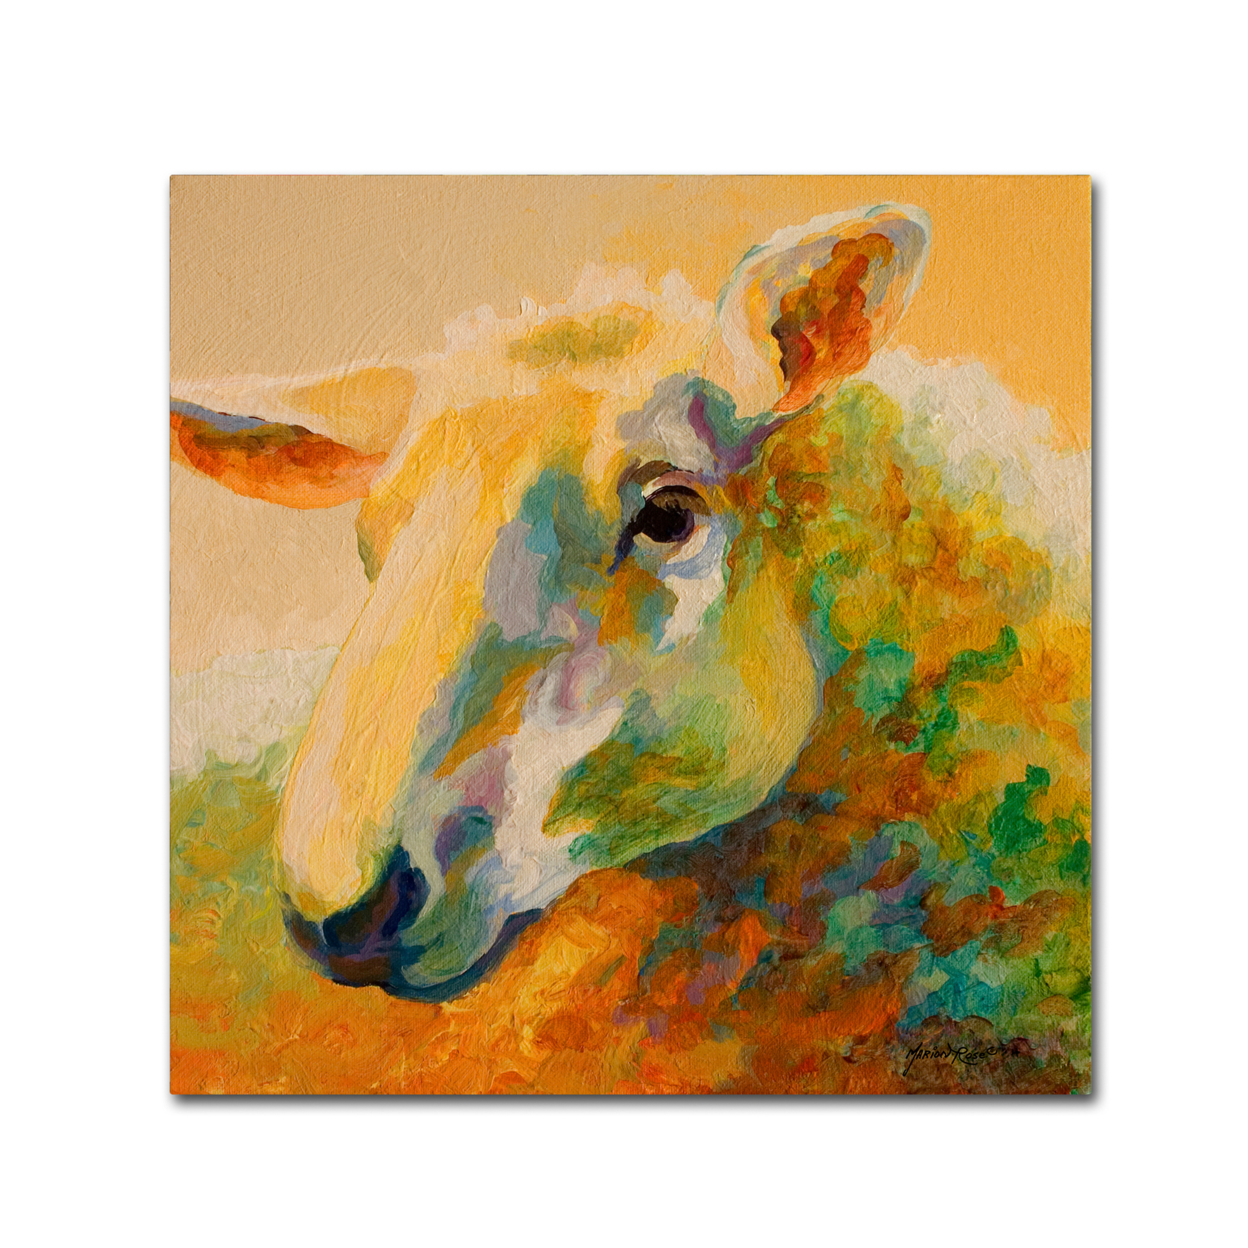 Marion Rose 'Ewe Study III' Ready To Hang Canvas Art 18 X 18 Inches Made In USA